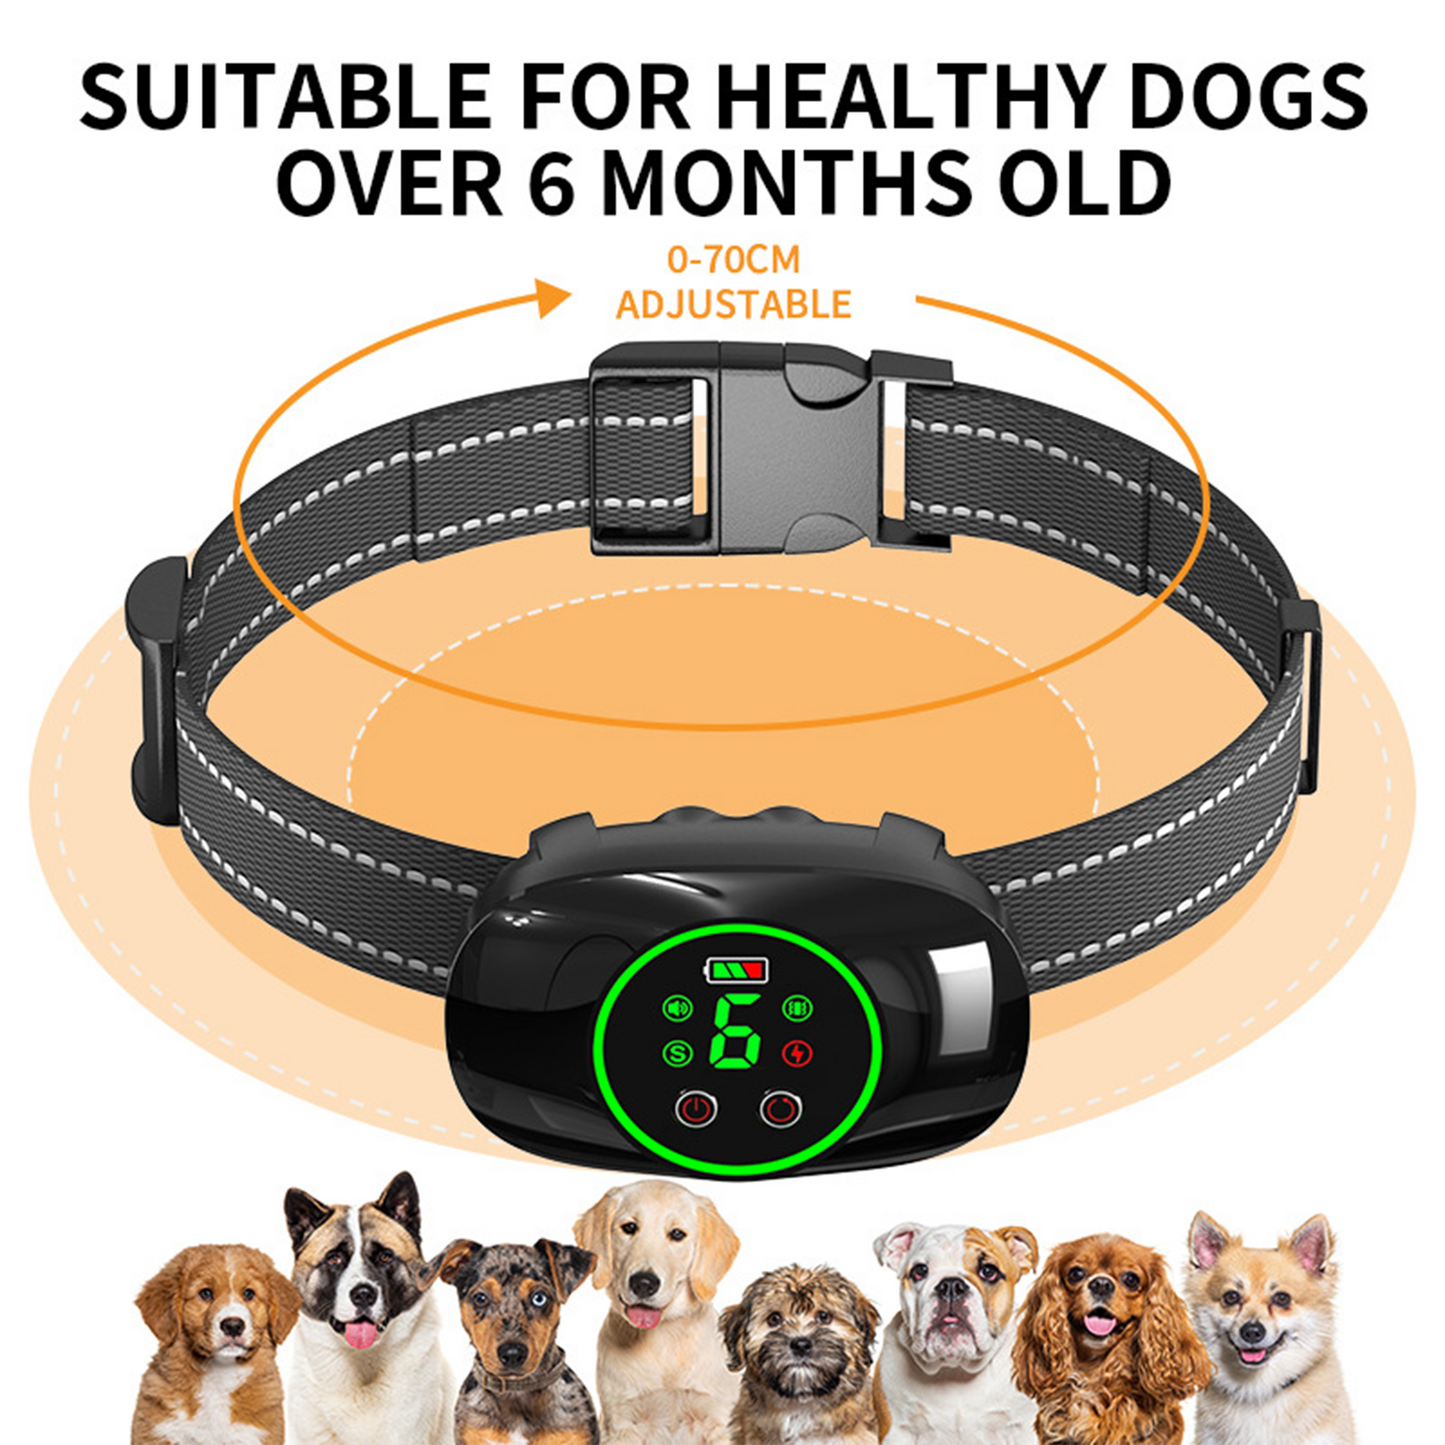 Dog Shock Collar for 2 Dogs, Dog Training Collar with Remote for Large Medium Small Dogs, Rechargeable E-Collar Waterproof Collars with 3 Training Modes, Range up to 3300 Ft-Dog Training-Pets Are Framily